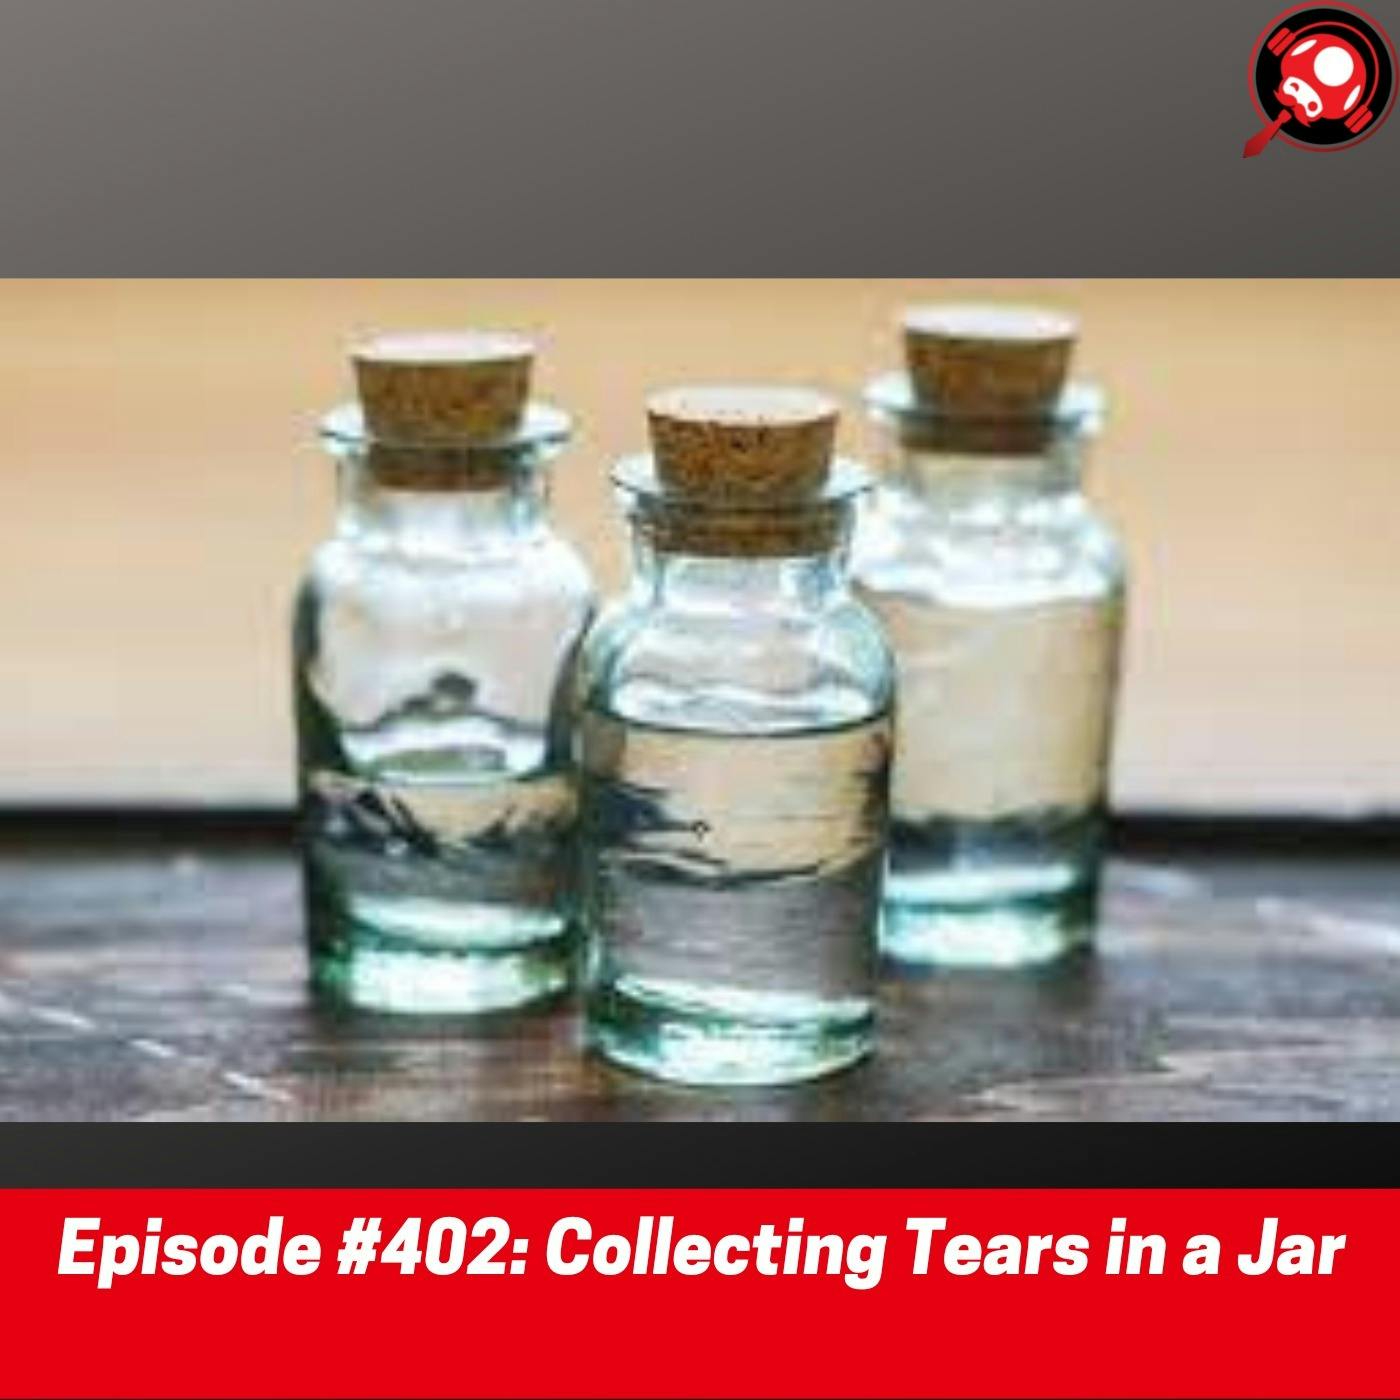 #402: Collecting Tears in a Jar